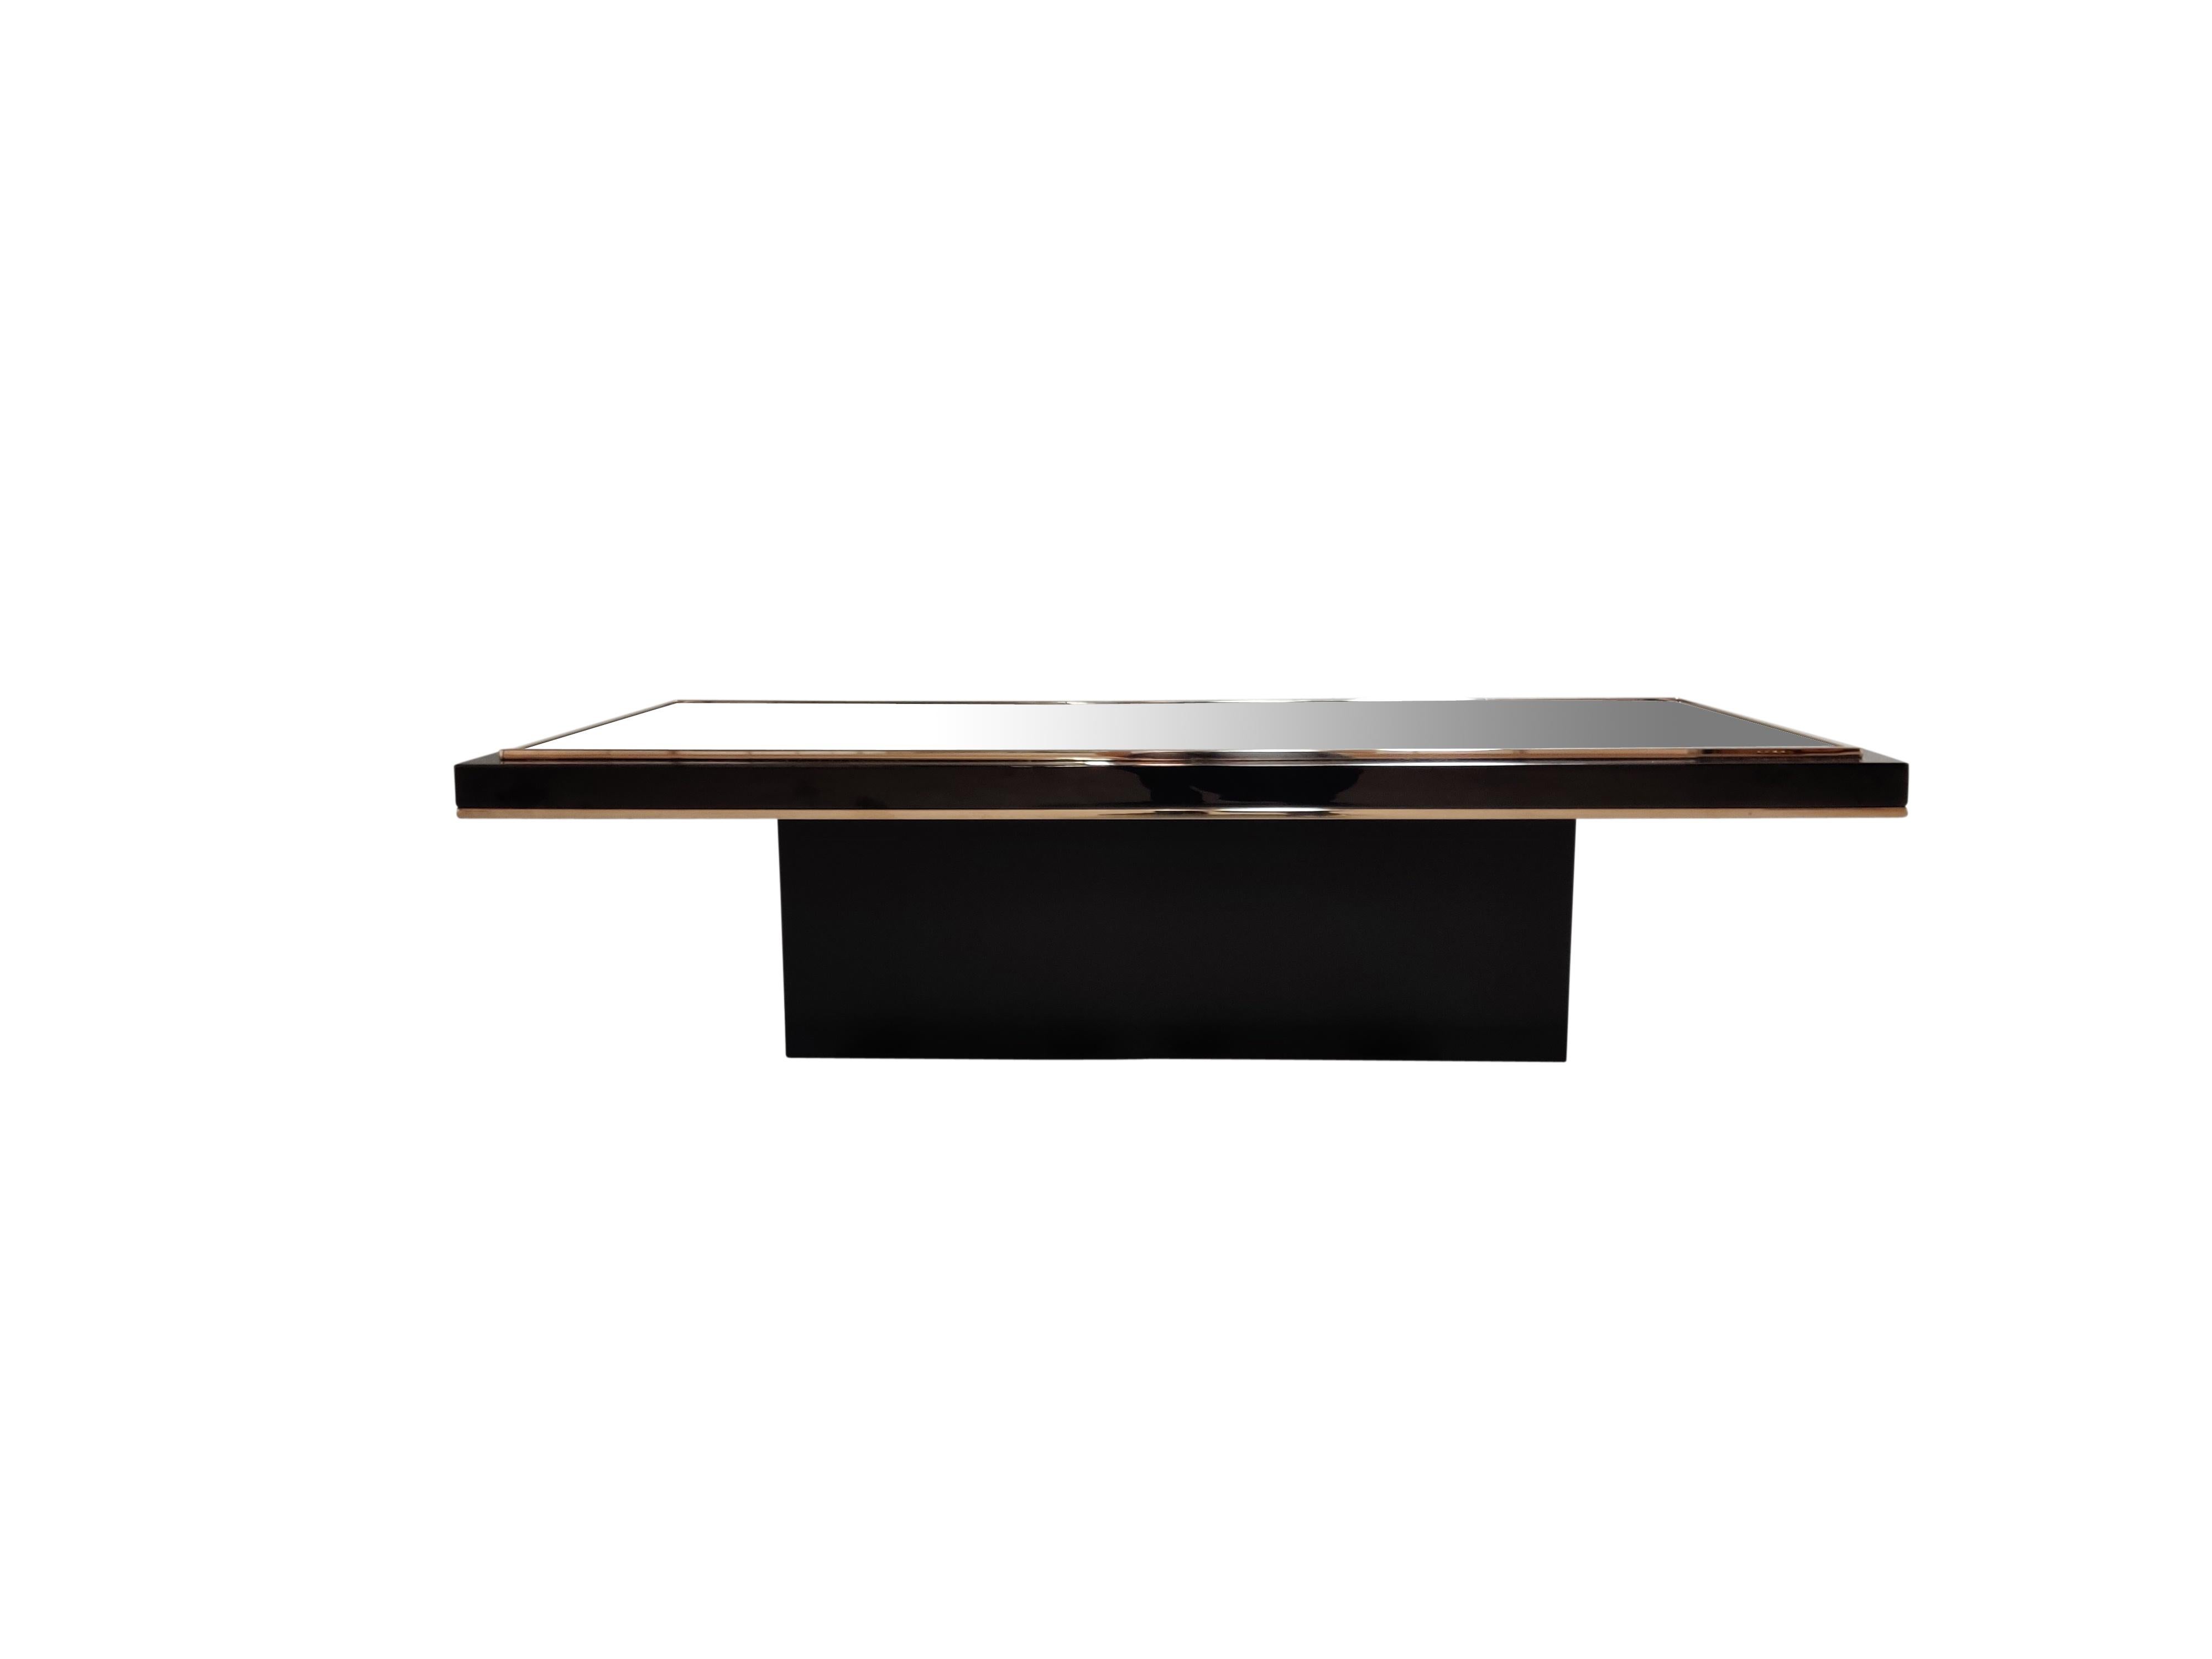 Quality 24-karat gold layered and black metal coffee table with a smoked glass top.

The table was manufactured by Belgochrom and produced quality furniture pieces with a luxurious appeal.

The table has had one previous owner and was maintained